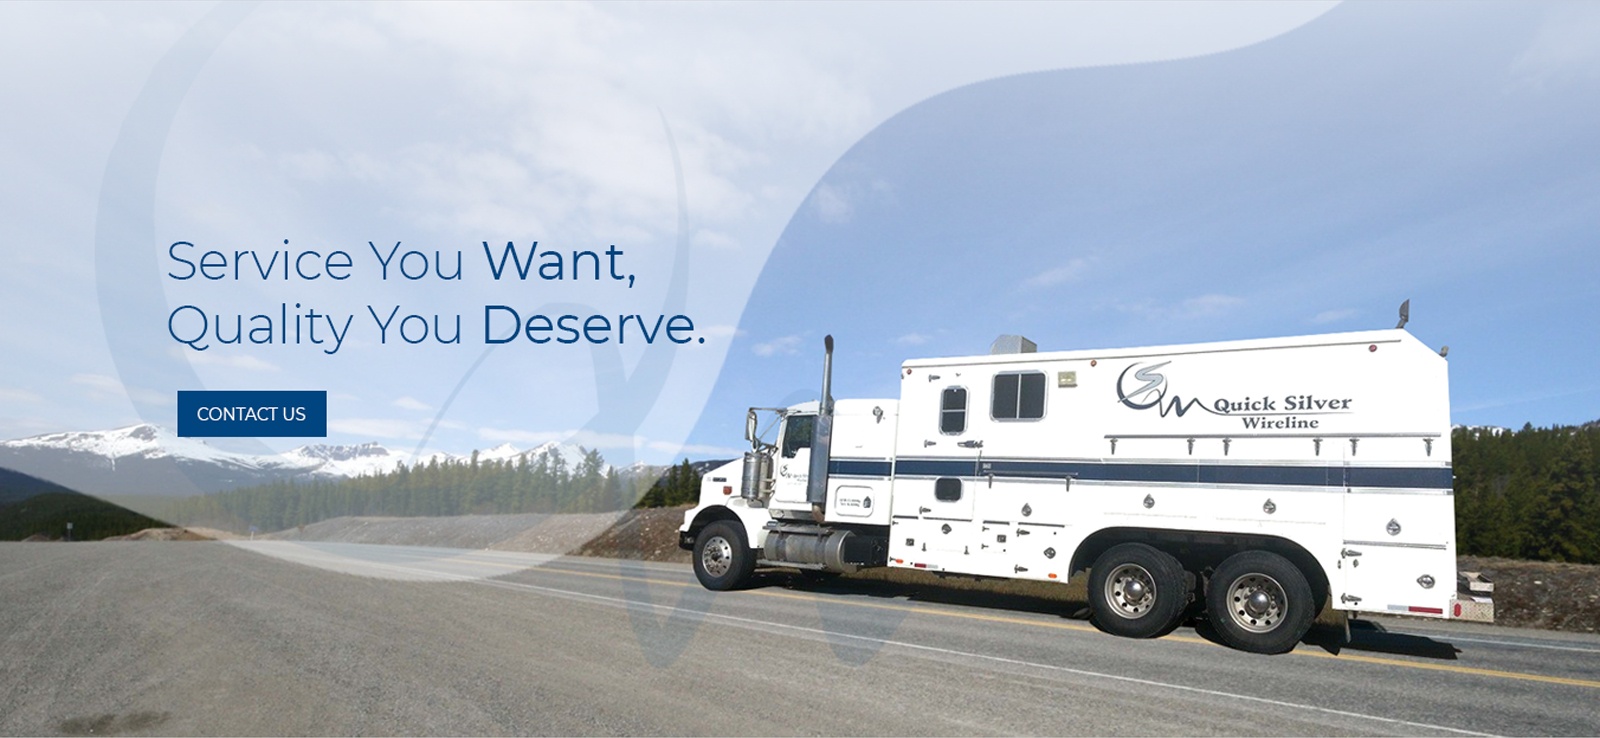 Services you Want, Quality You Deserve - Quick Silver Wireline